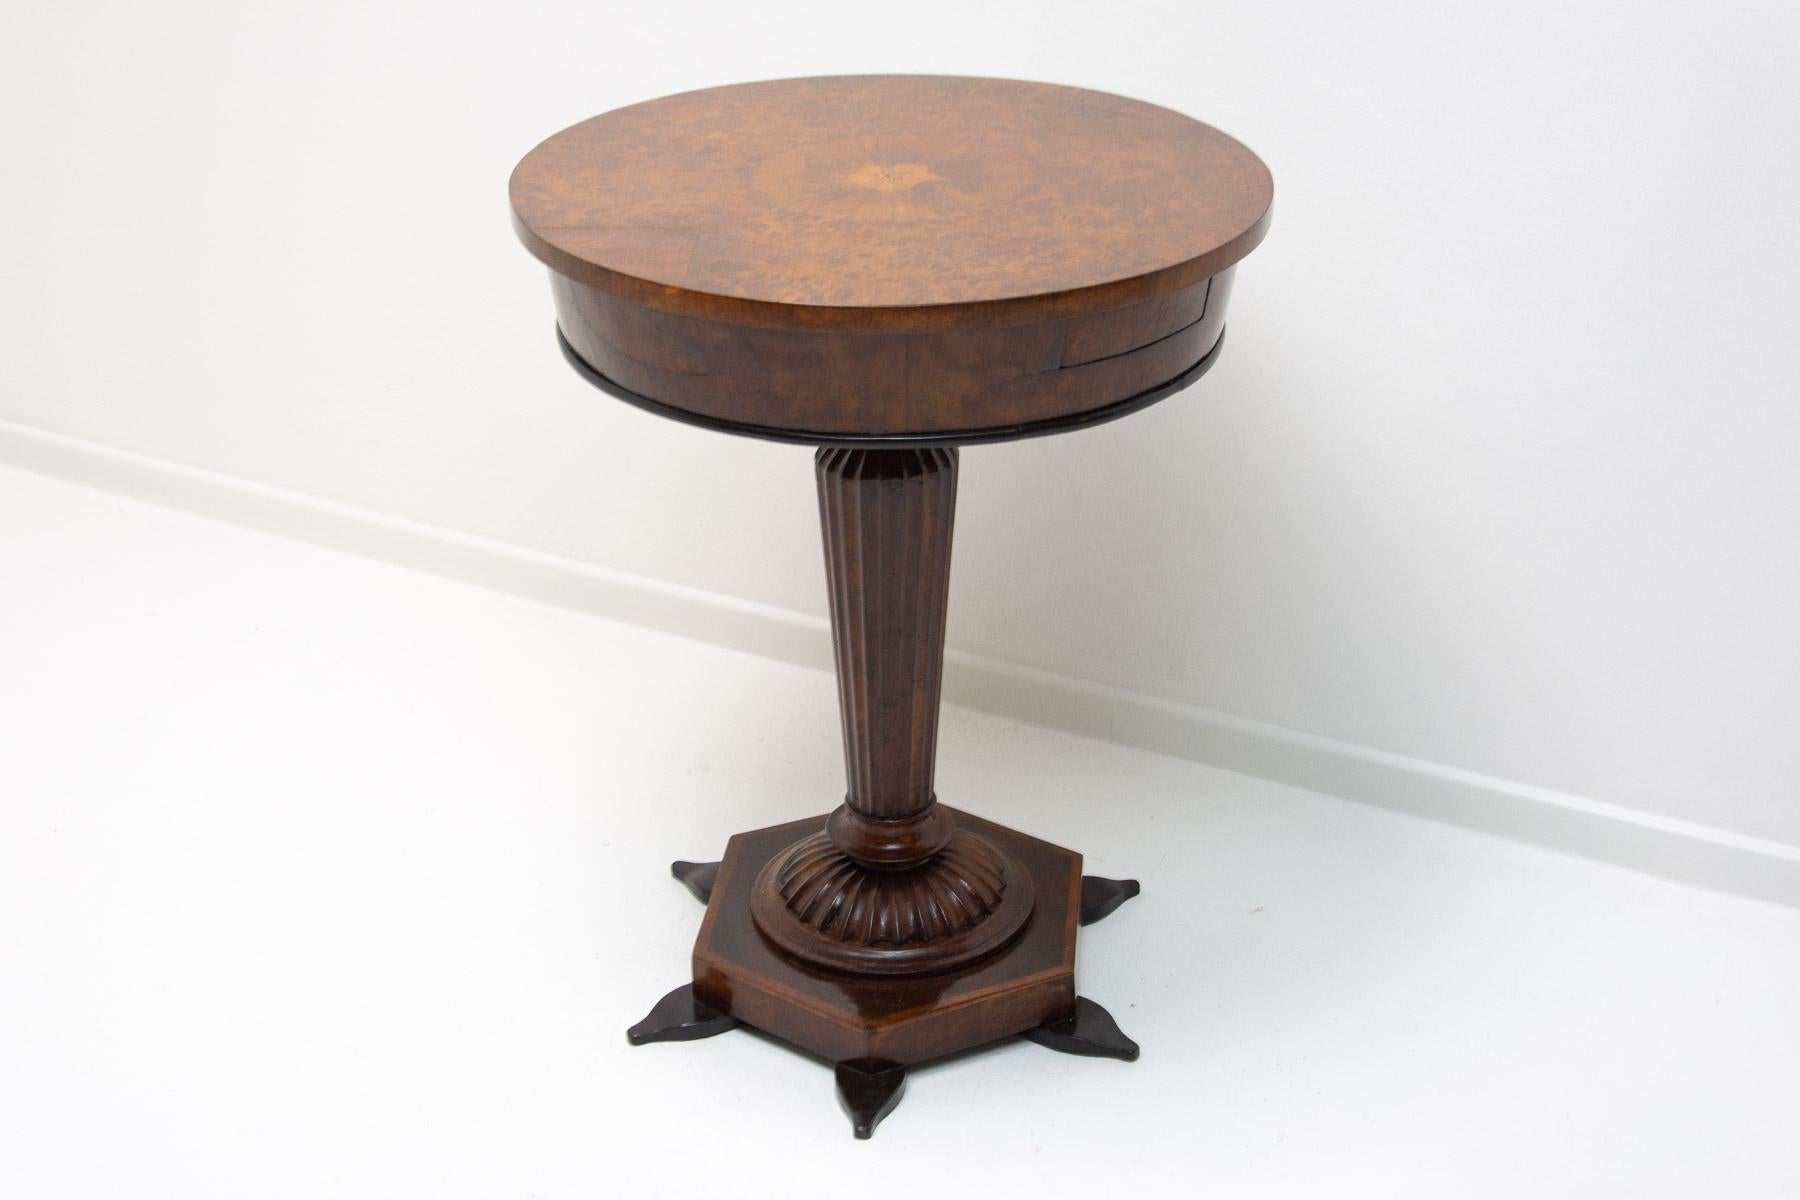 This table was made in Austria-Hungary at the end of the 19th century and is made in a neo-baroque style.
It is made of walnut, oak and maple wood, characterized by elaborate carvings or storage space located under the table top. The table is